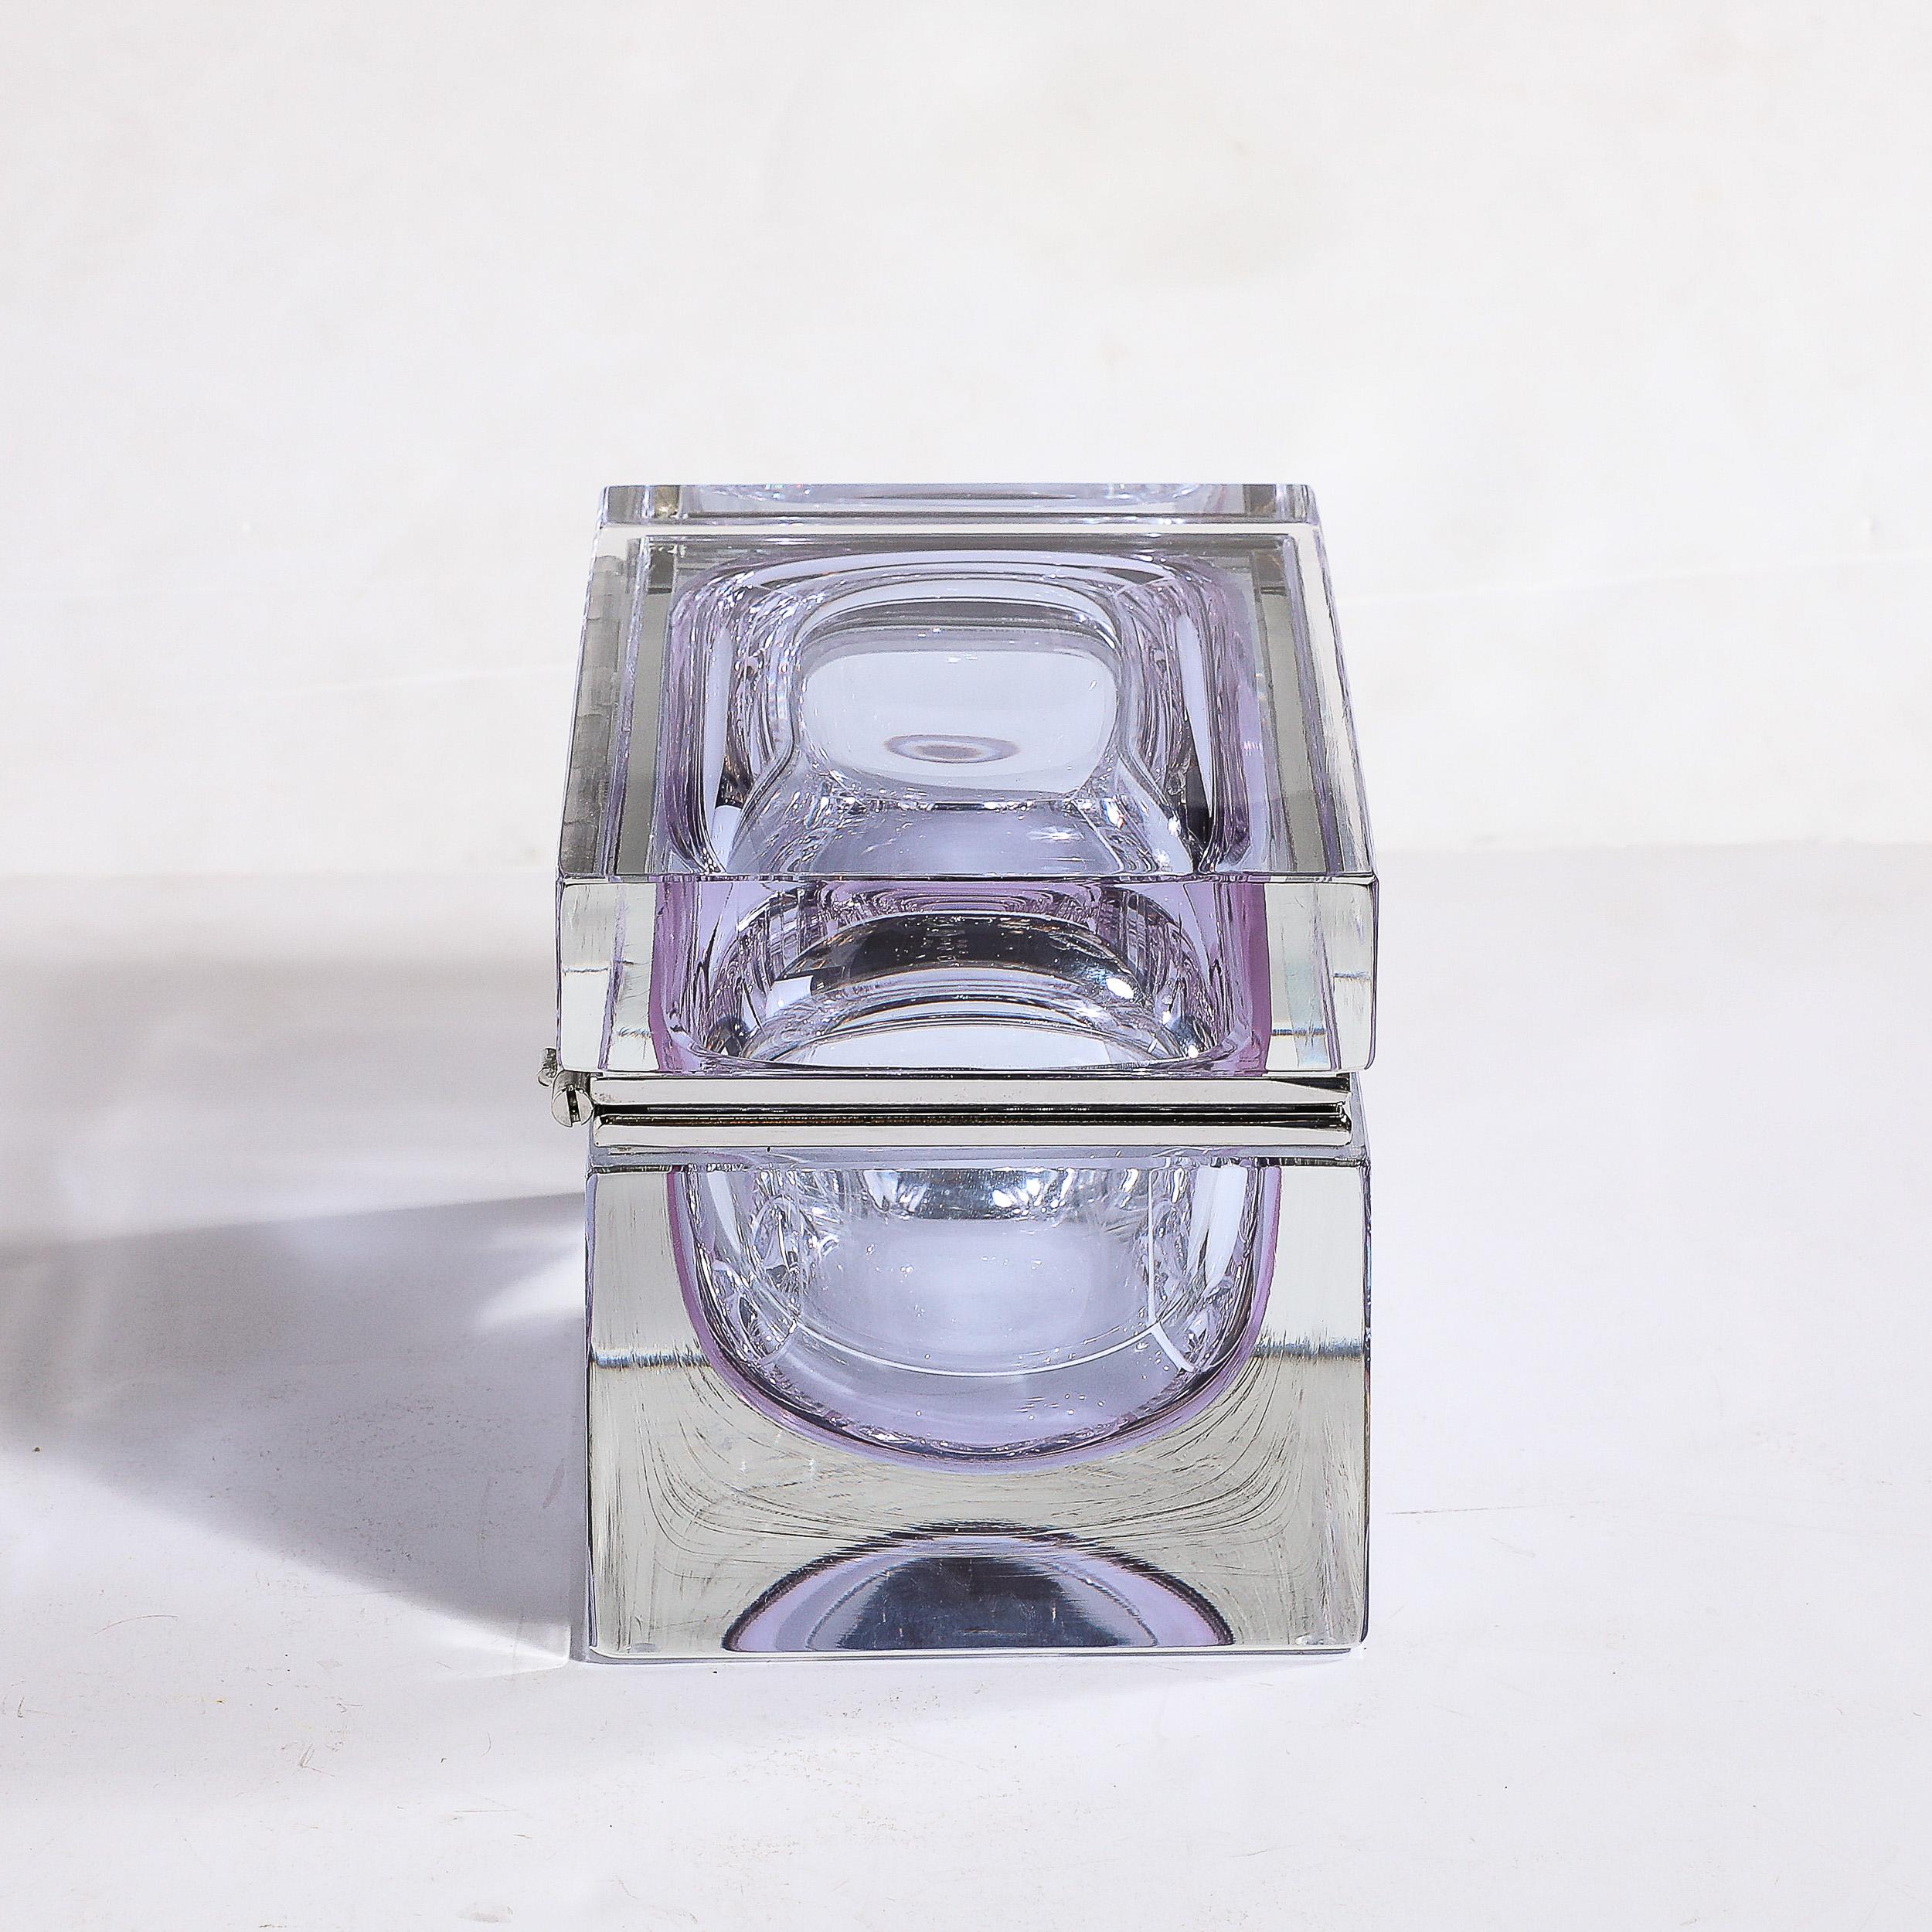 Modernist Hand-Blown Murano Glass Box in Lavender with Nickel Fittings For Sale 1